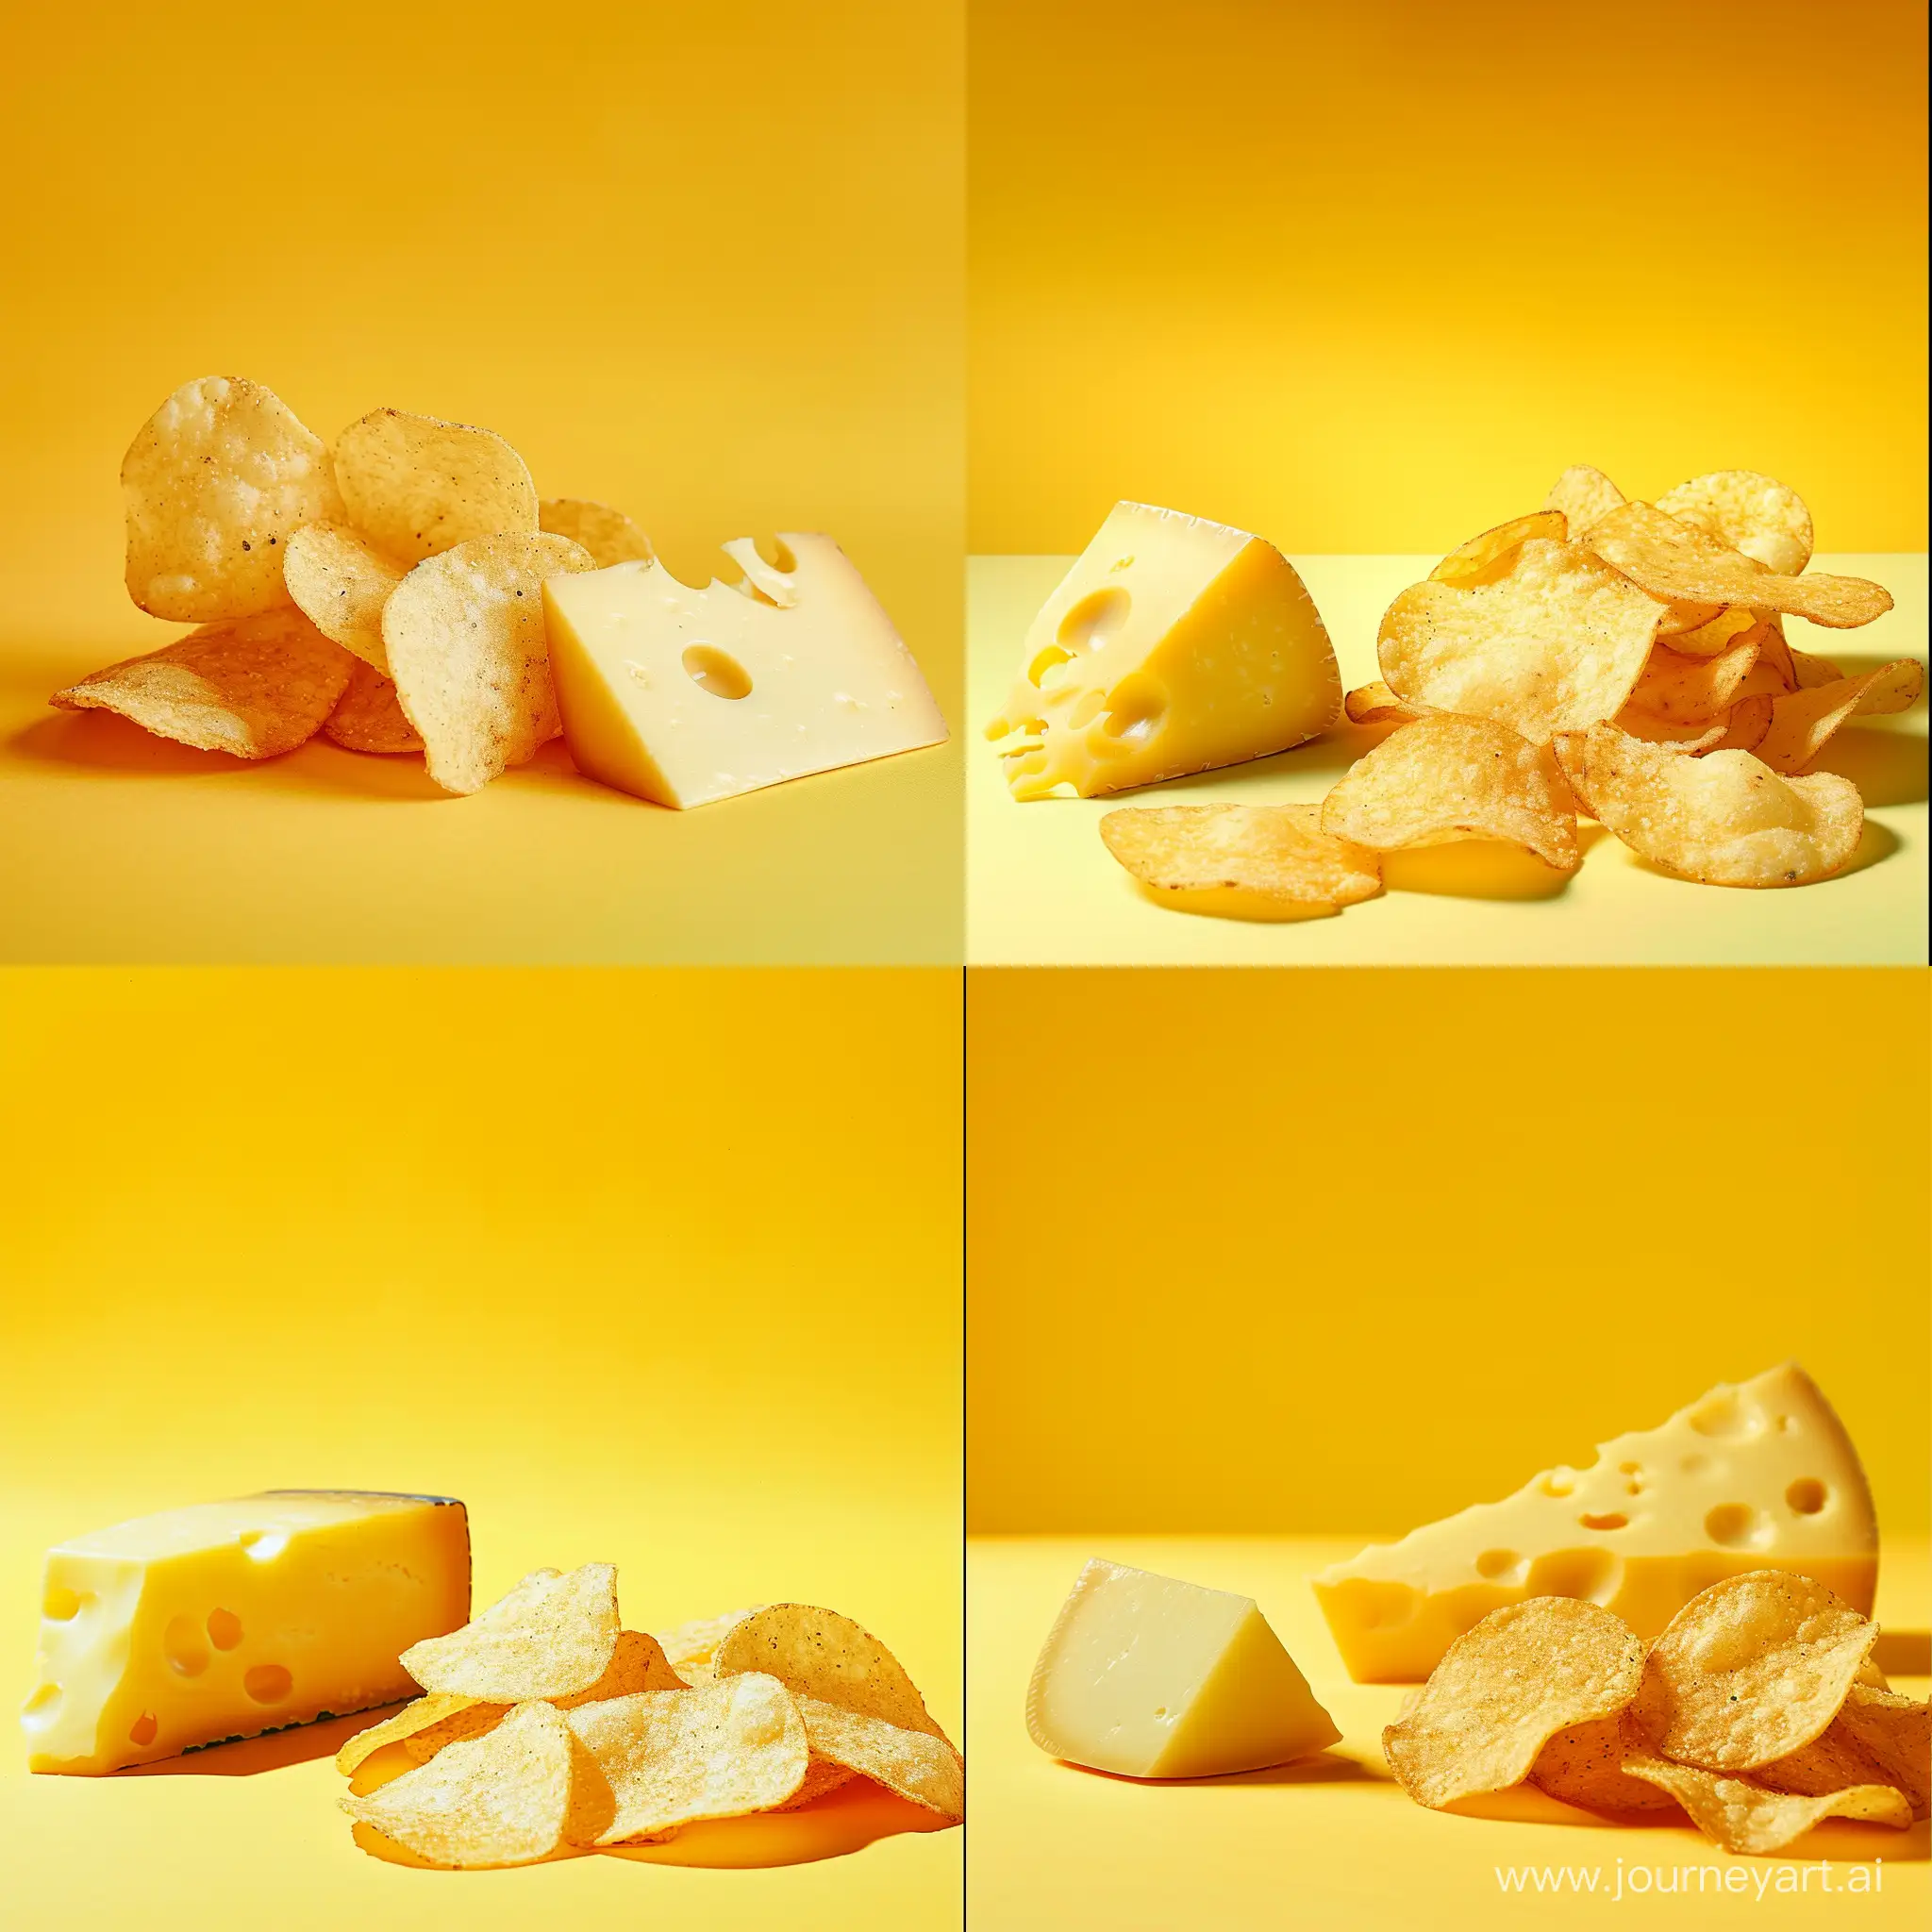 Delicious-Cheese-Chips-Arrangement-on-Yellow-Background-Studio-Food-Photography